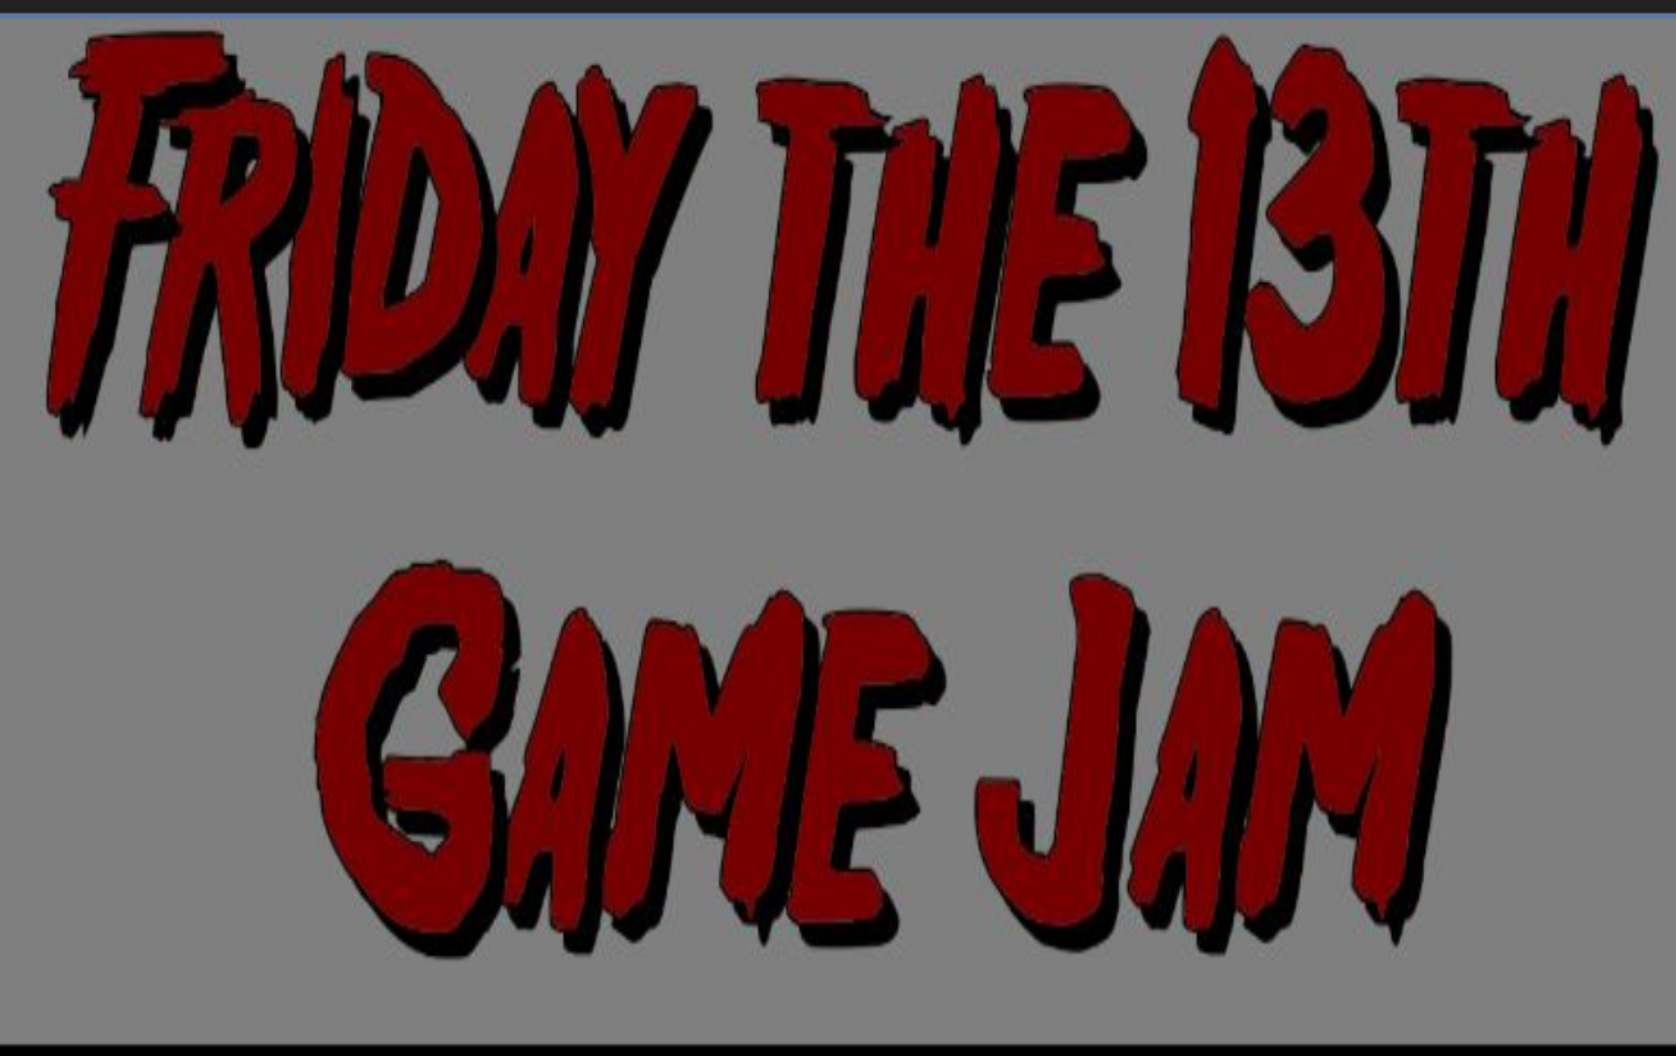 Friday the 13th Game Jam